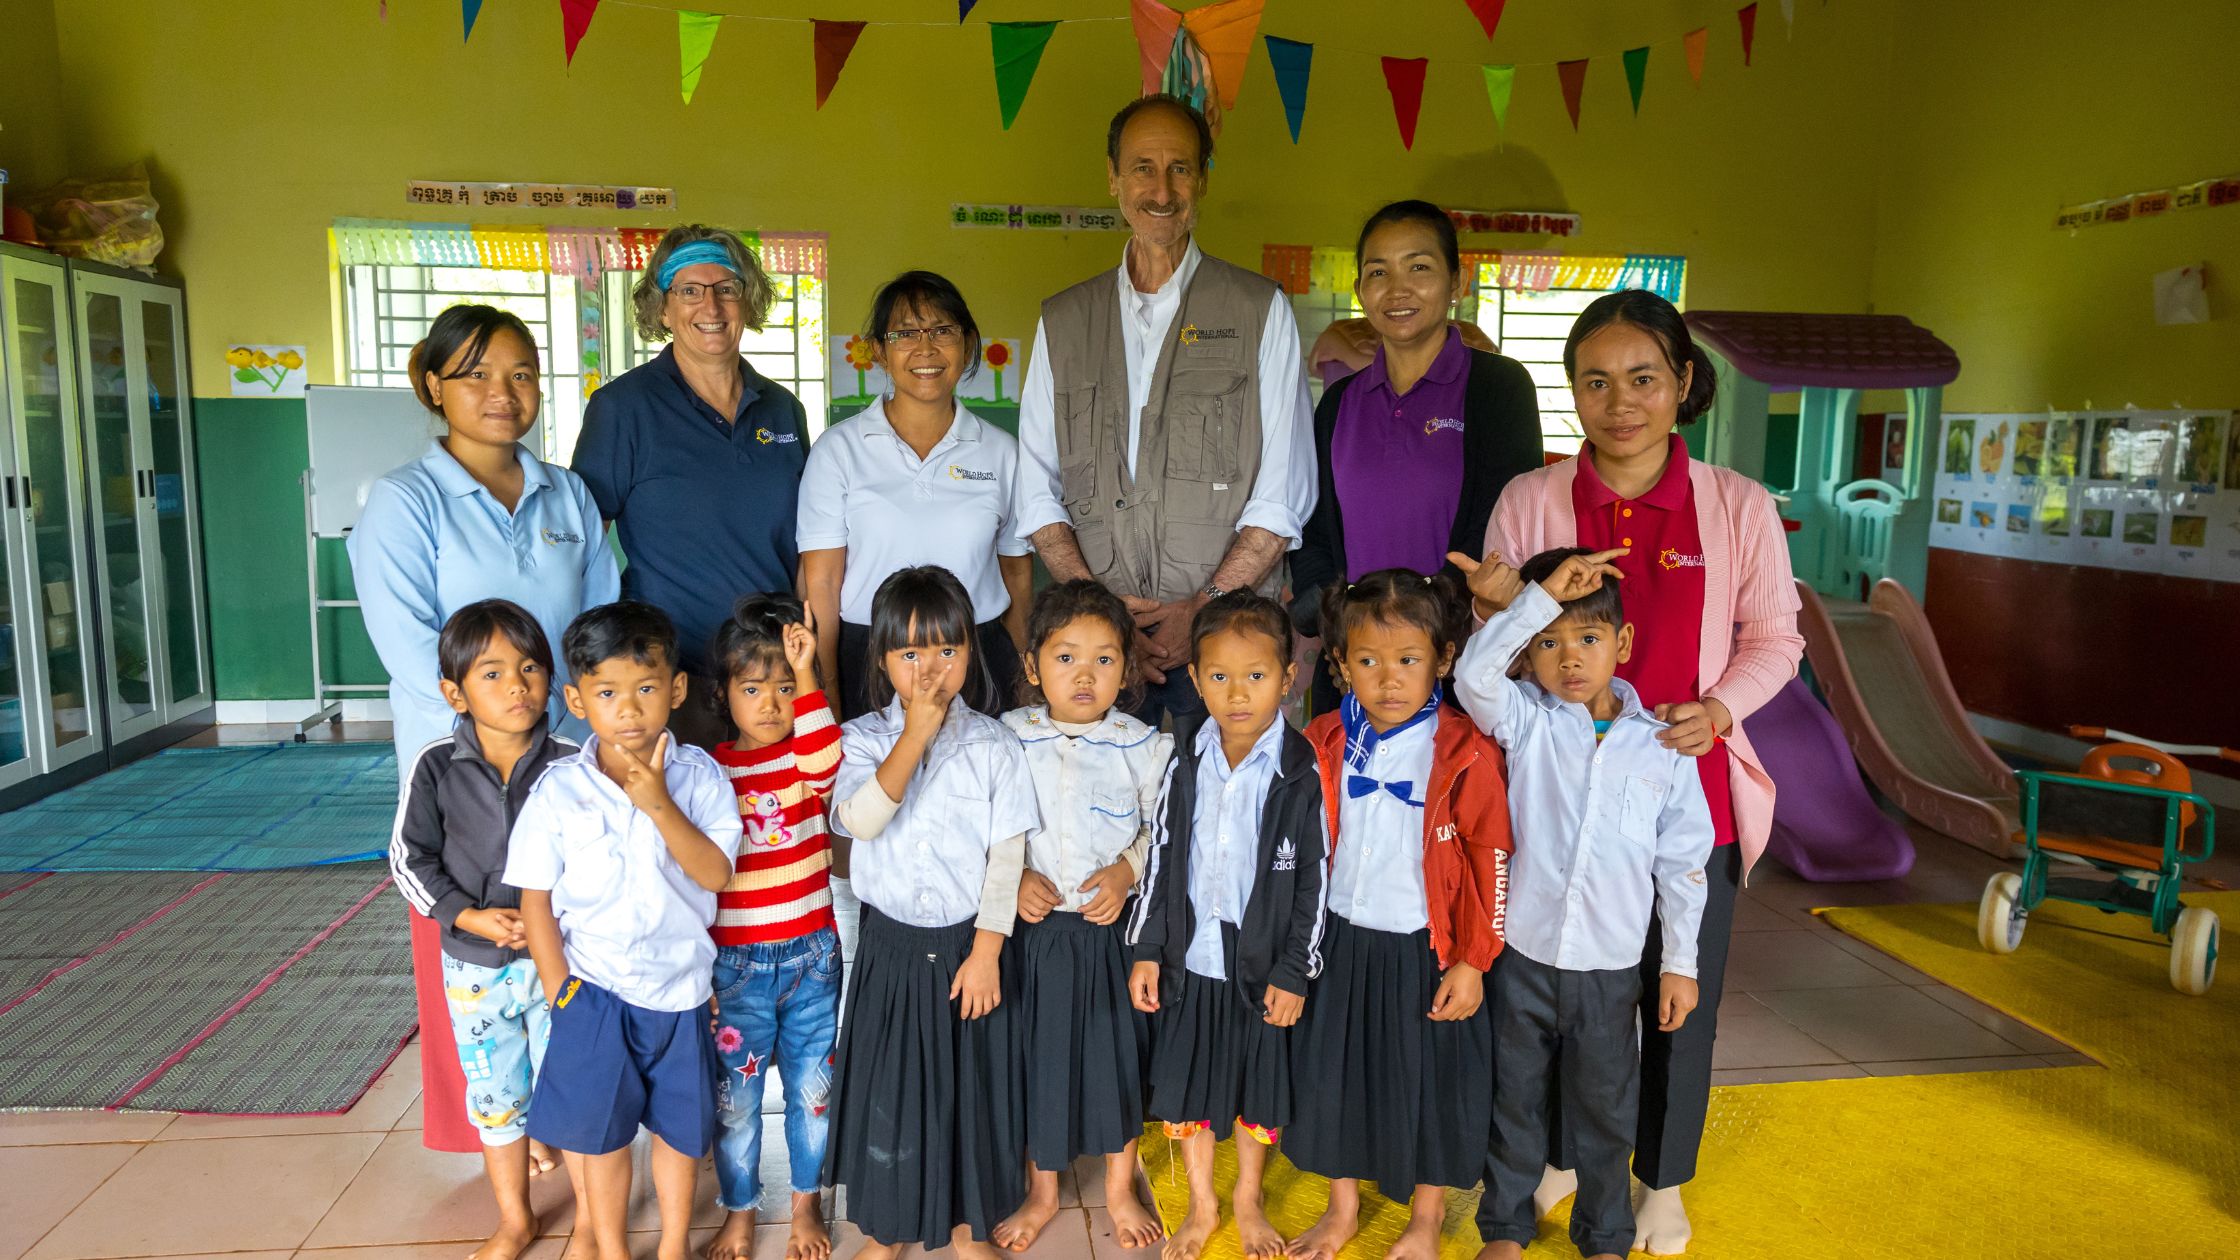 John in Cambodia at school with kids